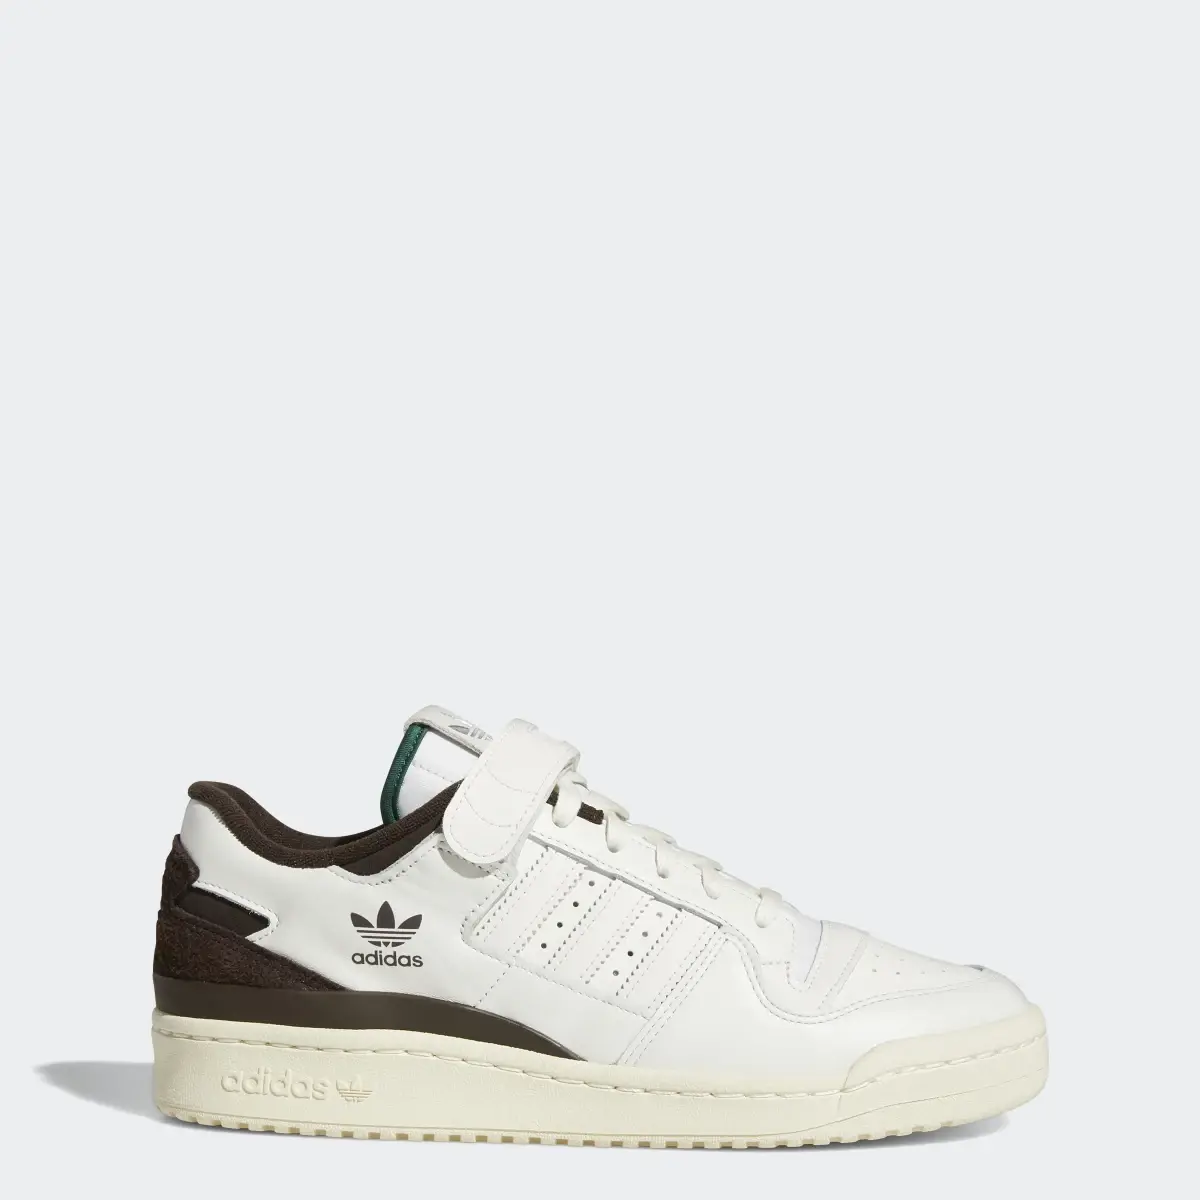 Adidas Forum 84 Low Shoes. 1